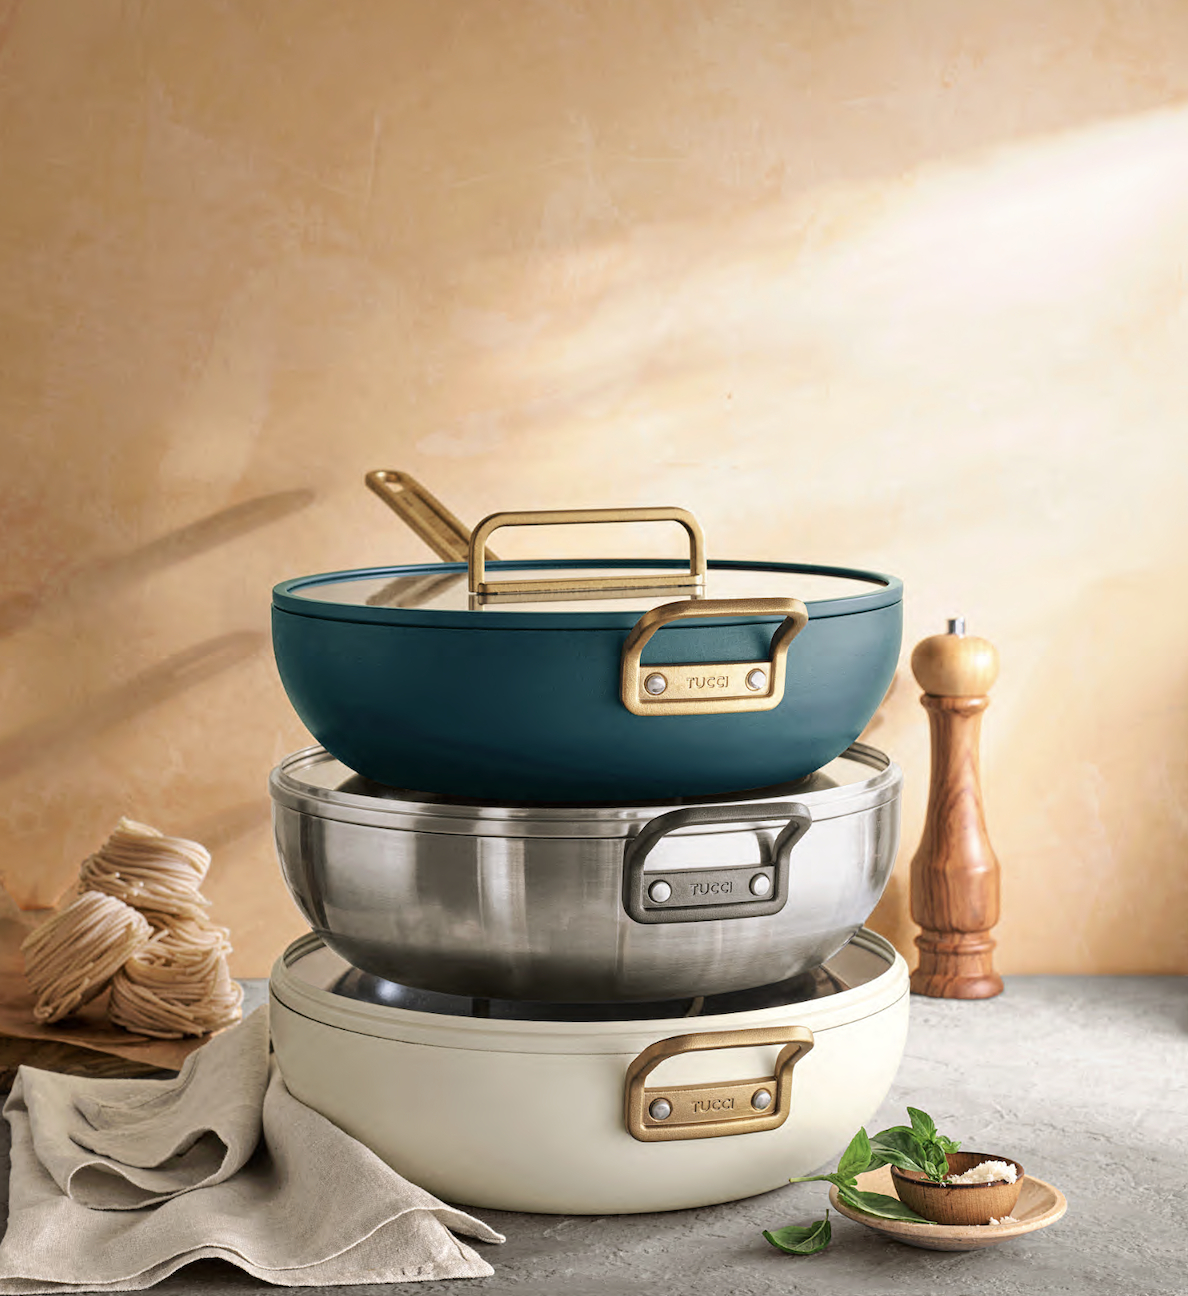 https://mms.businesswire.com/media/20230918559851/en/1892431/5/Stanley_Tuccis_new_cookware_line_TUCCI_By_GreenPan.jpg